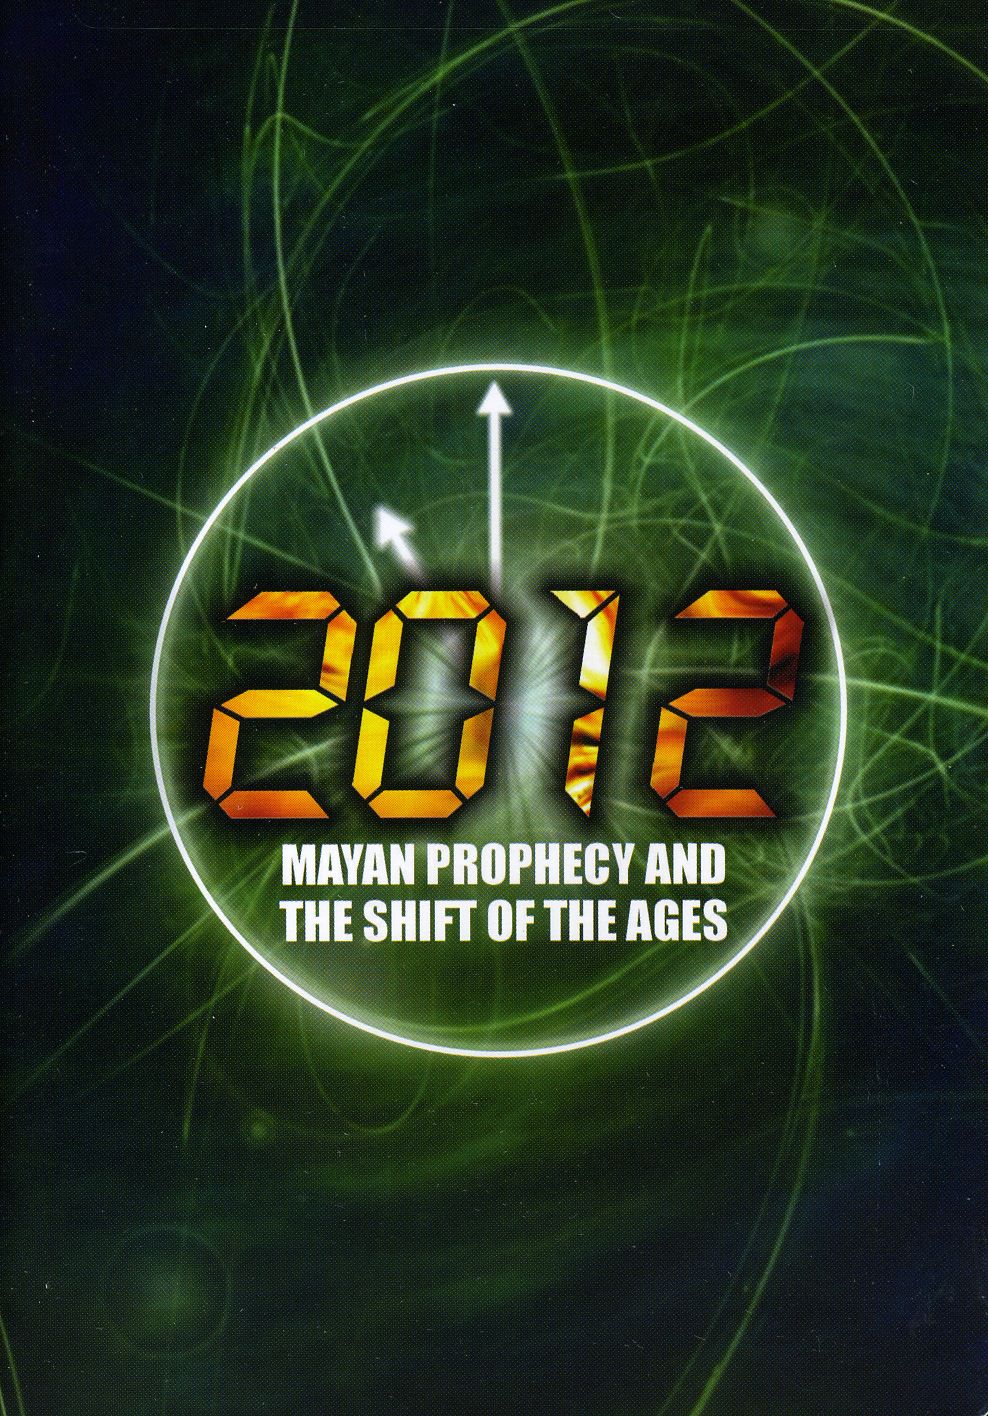 2012: MAYAN PROPHECY AND THE SHIFT OF THE AGES